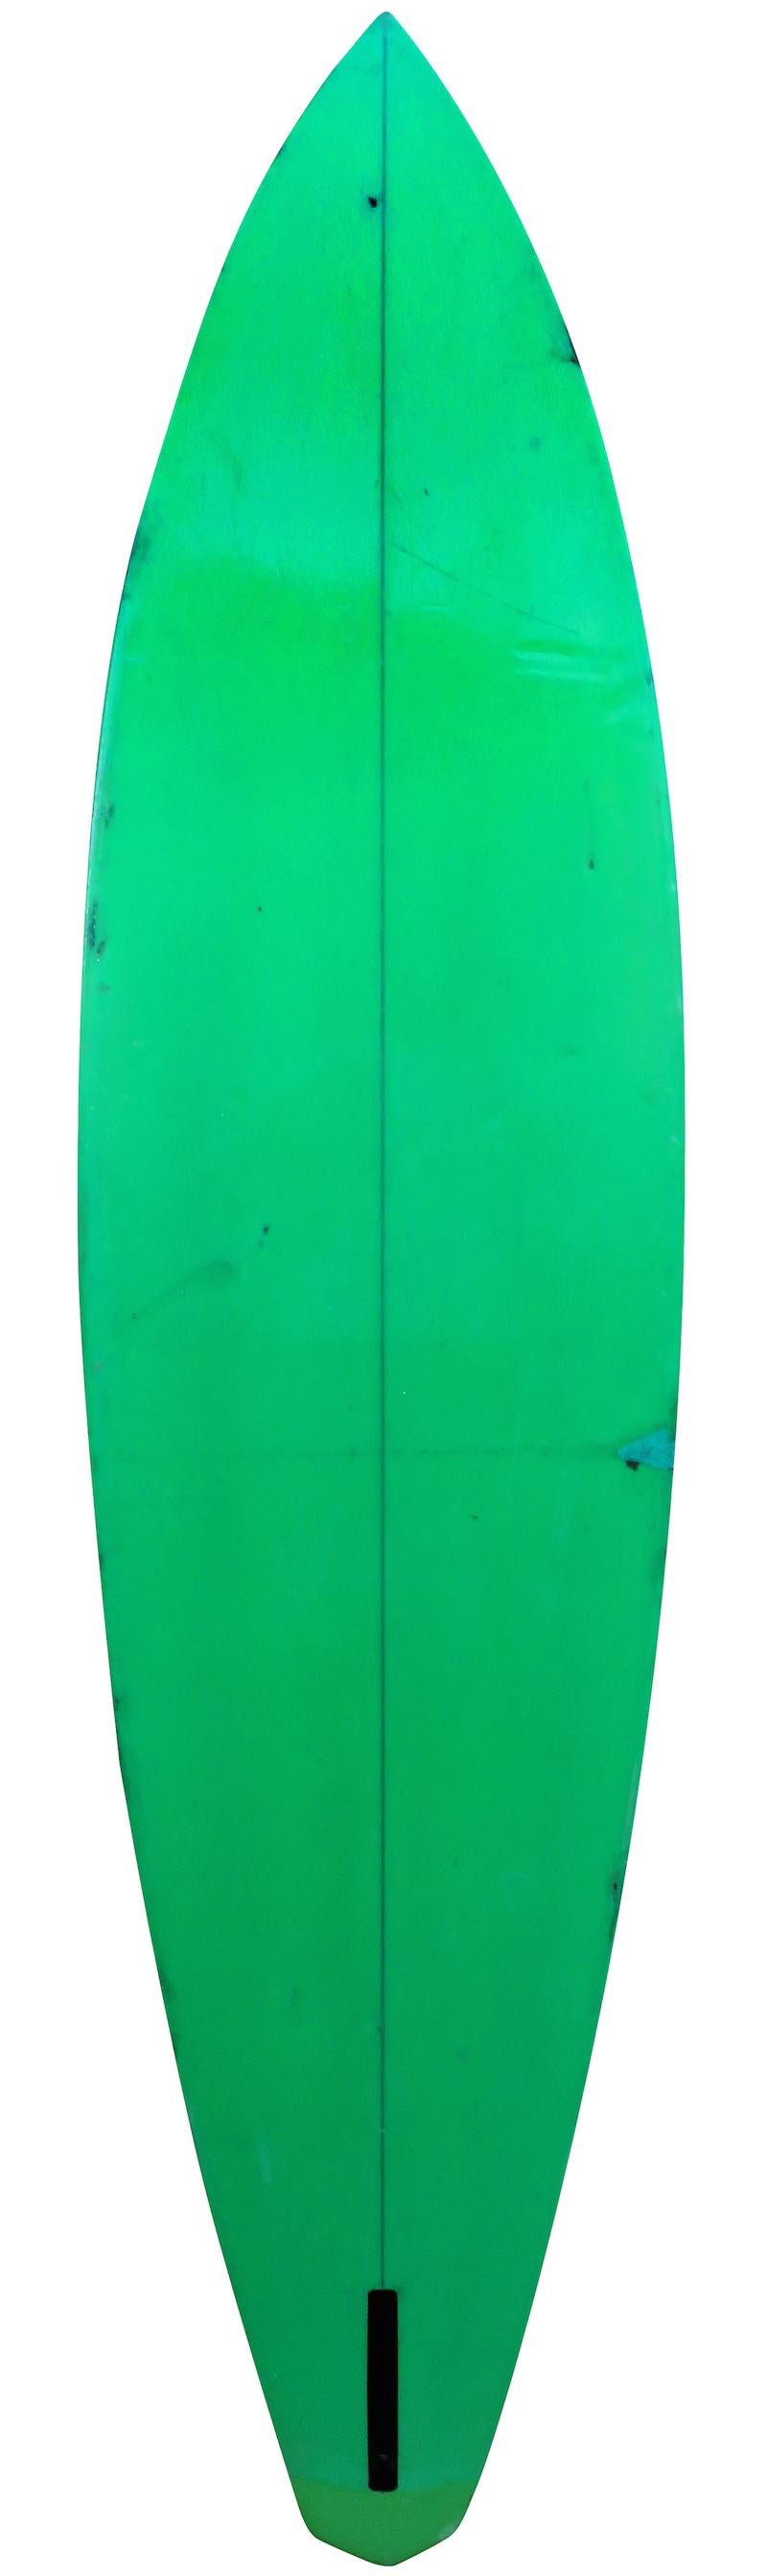 Mid-1970s Duryea single fin surfboard made in San Diego, California. Features a purple tinted deck/green tinted bottom, double pin stripe design, and diamond tail shape. This vintage surfboard remains in all original condition.